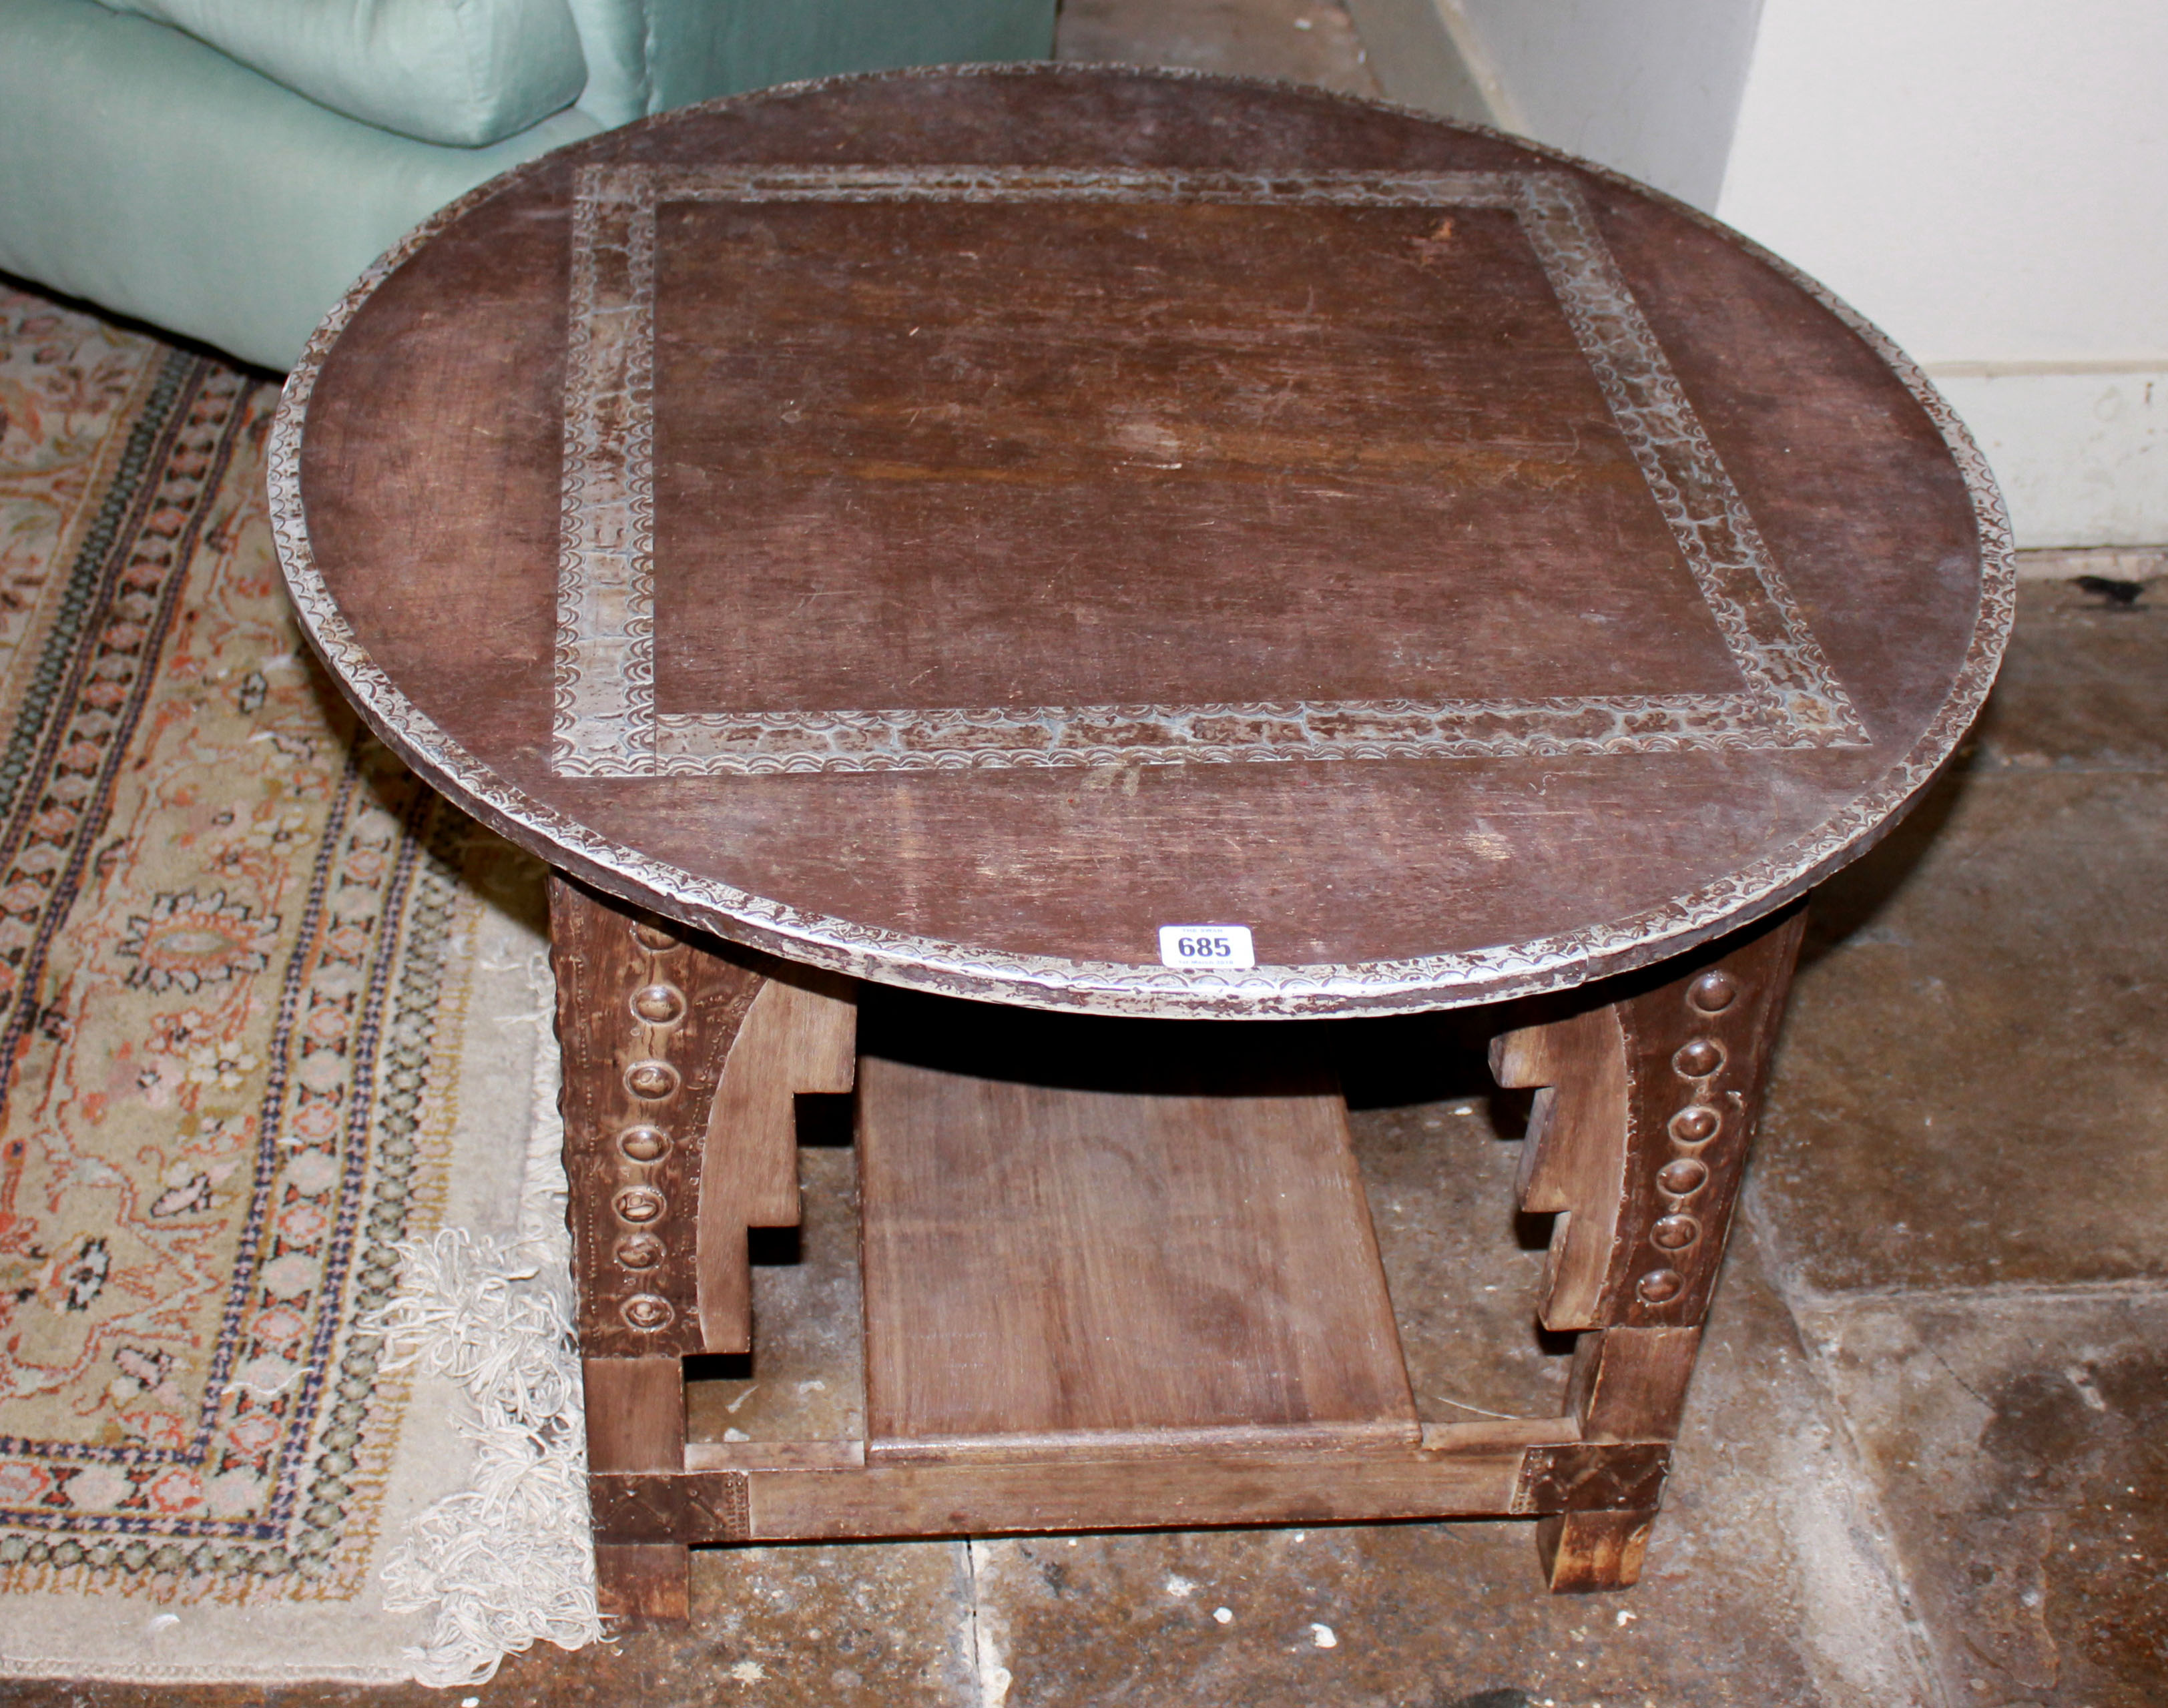 AN EARLY 20TH CENTURY AFRICAN WOODEN TABLE The circular top with metal inlay and edging, raised on